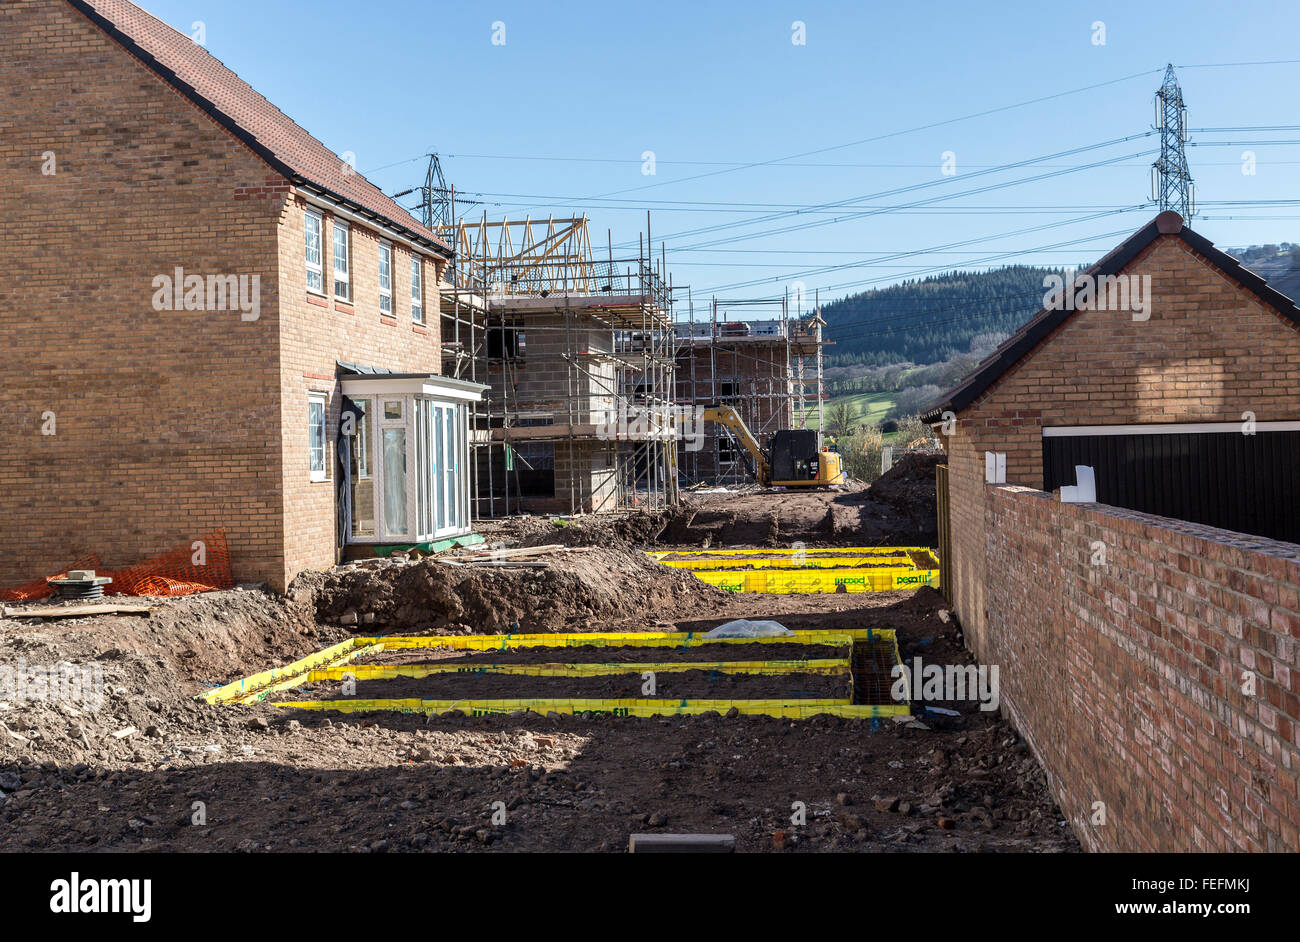 New build houses on estate with foundations being laid, Llanfoist, Wales, UK Stock Photo